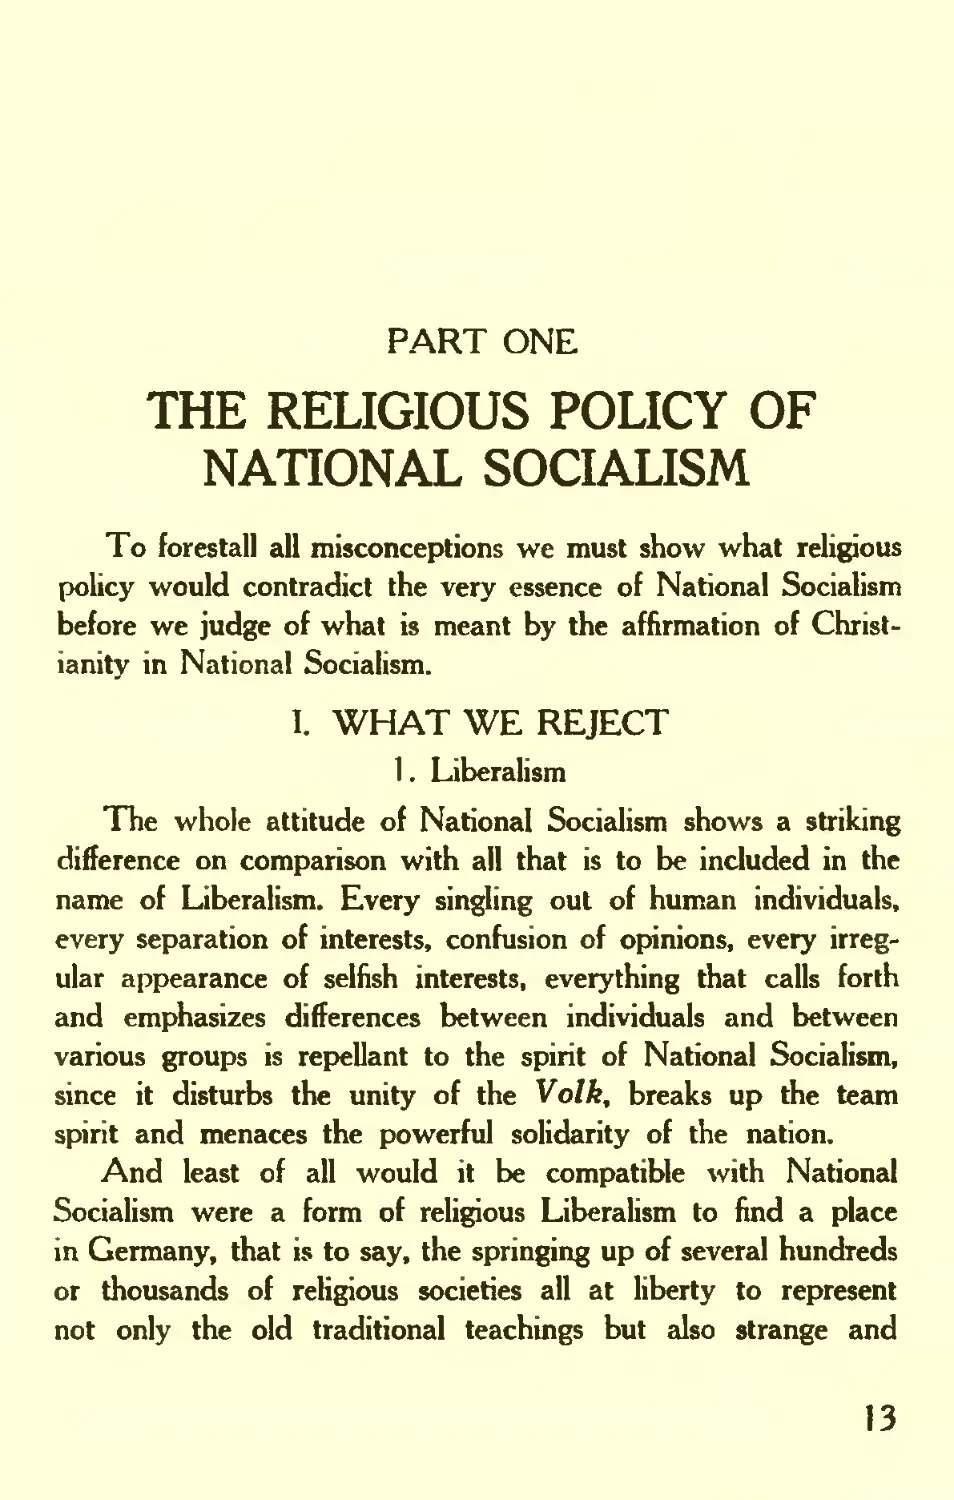 PART ONE: THE RELIGIOUS POLICY OF NATIONAL SOCIALISM
I. WHAT WE REJECT
1. Liberalism